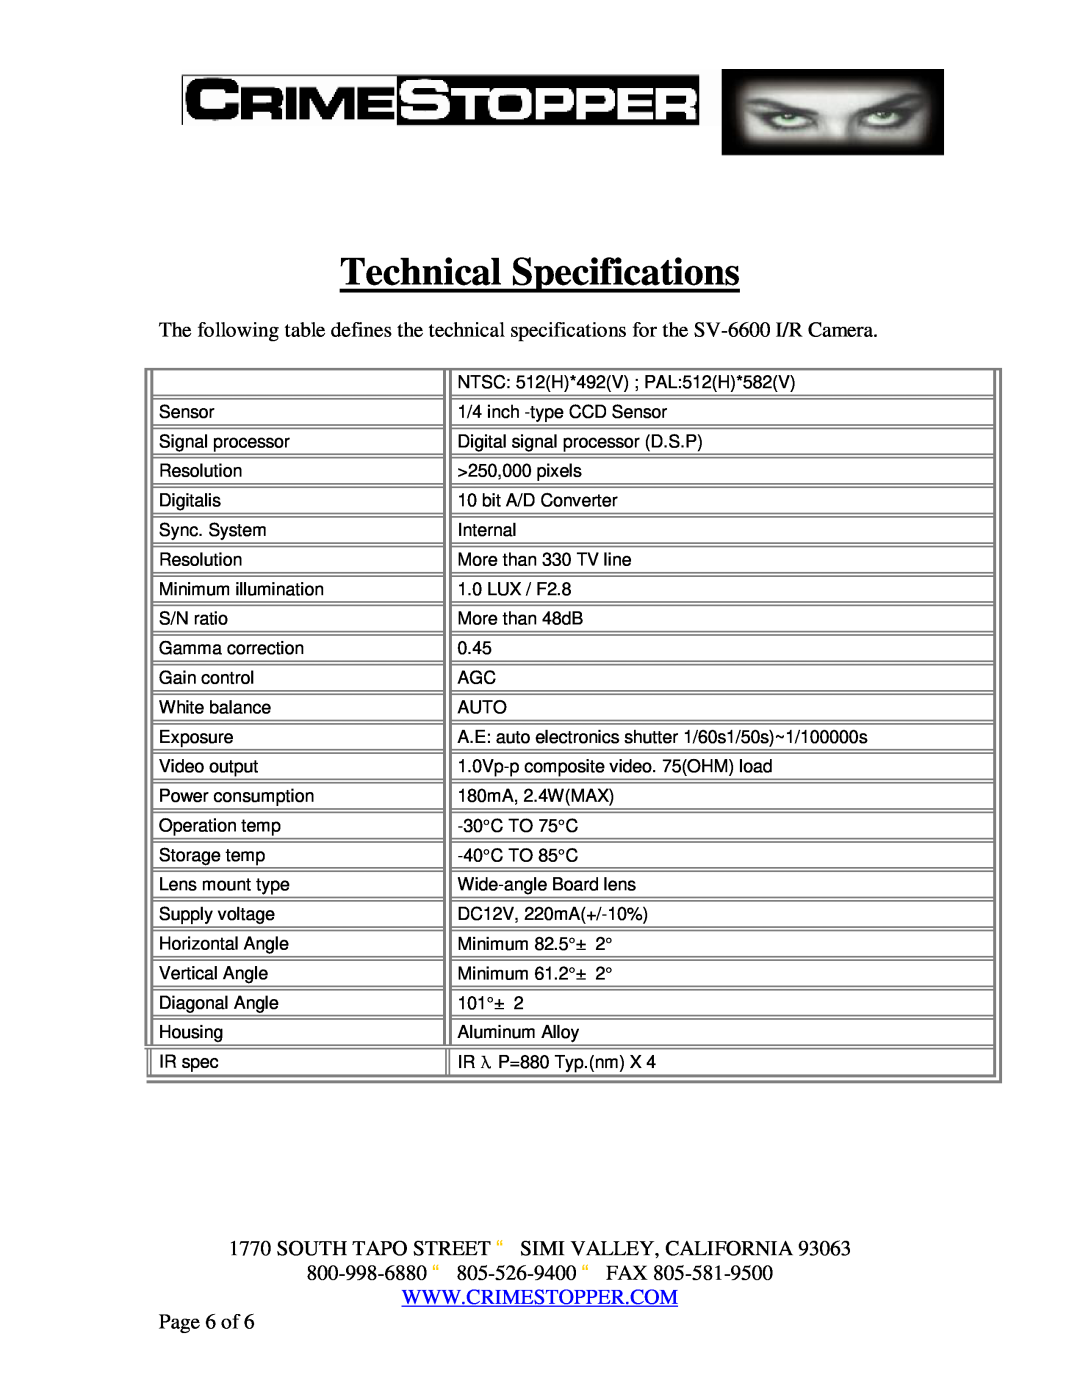 Crimestopper Security Products SV-6600 I/R Technical Specifications, South Tapo Street ª Simi Valley, California 